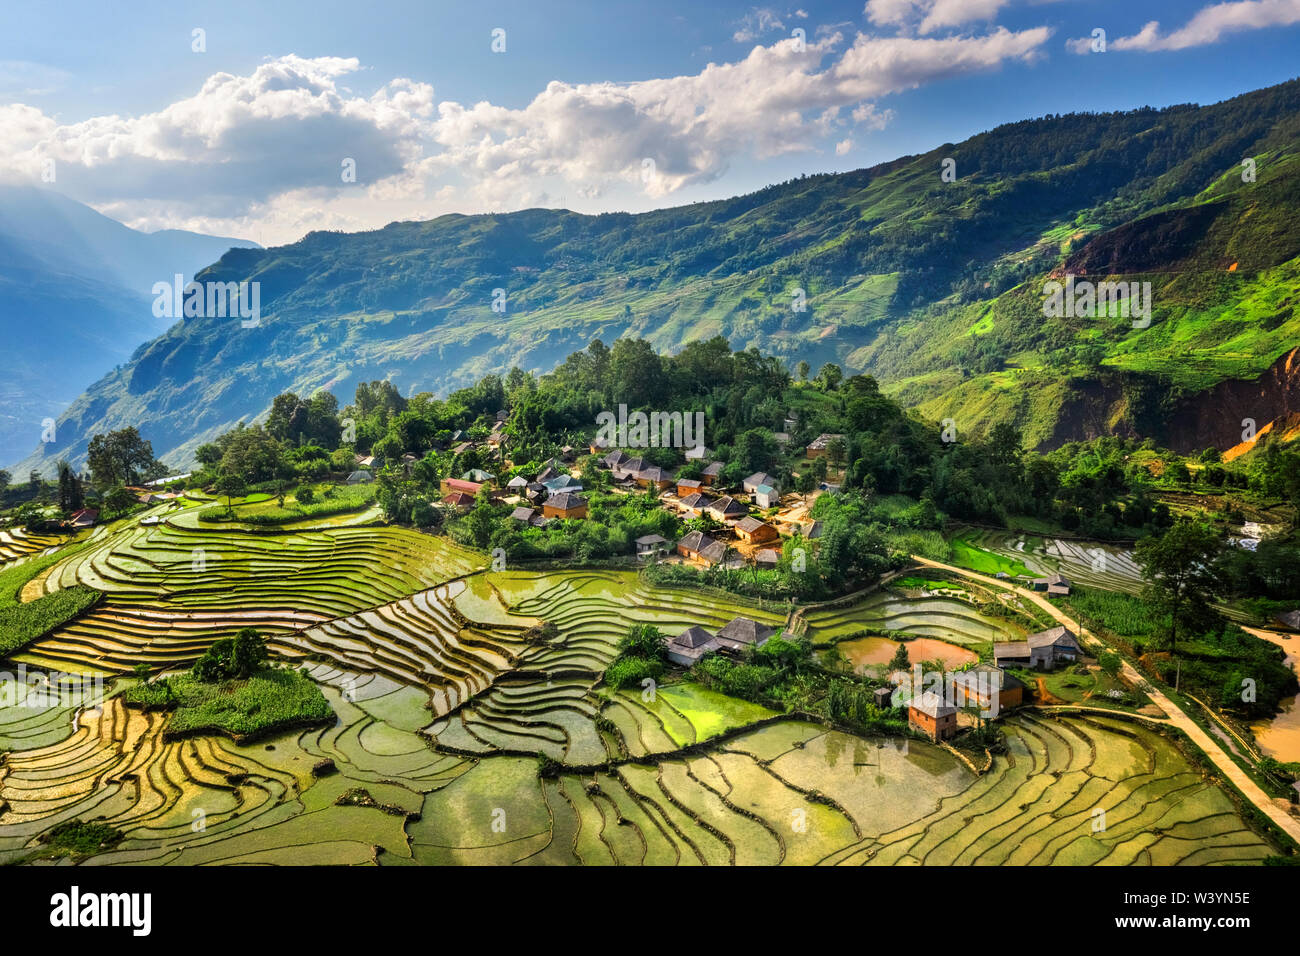 Trinh Tuong house or house made of land of ethnic minorities in Y Ty, Lao Cai, Vietnam. This is the traditional house of Ha Nhi people. Stock Photo